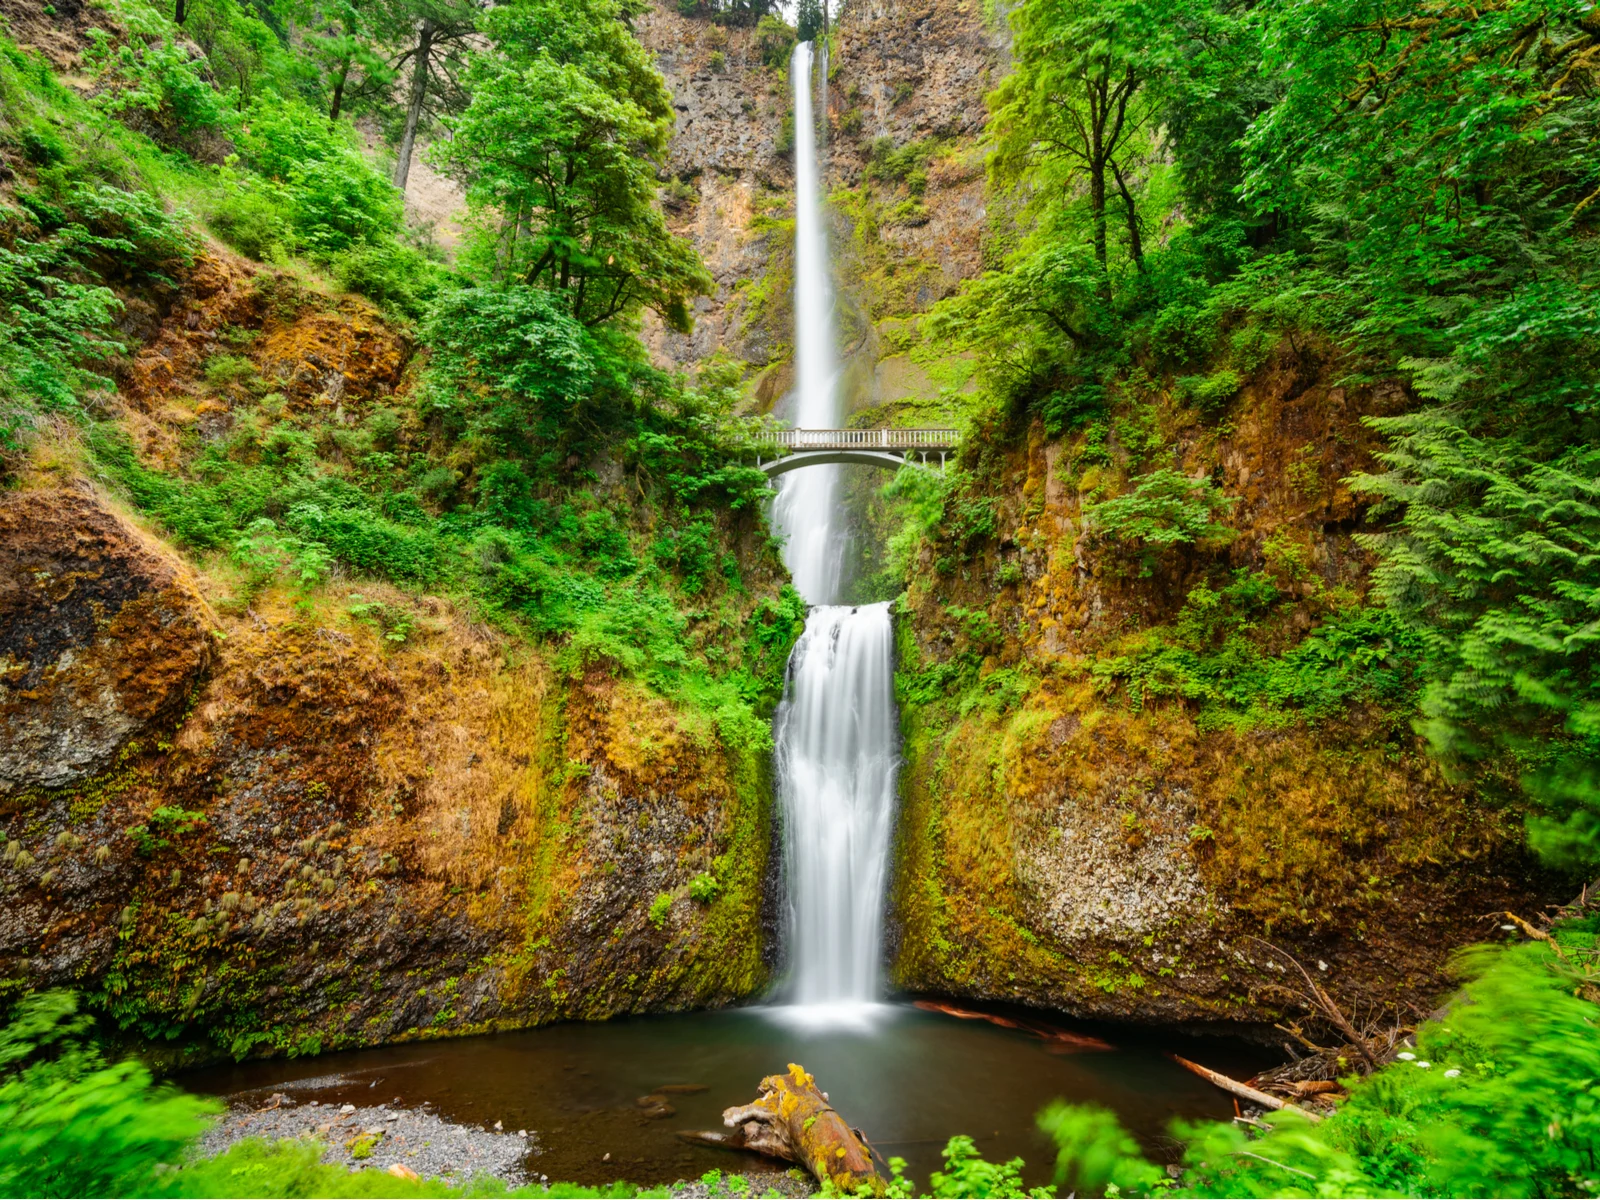 Multnomah Falls, one, one of the best places to visit in Oregon, viewed in the summer with lush greenery around the rocks